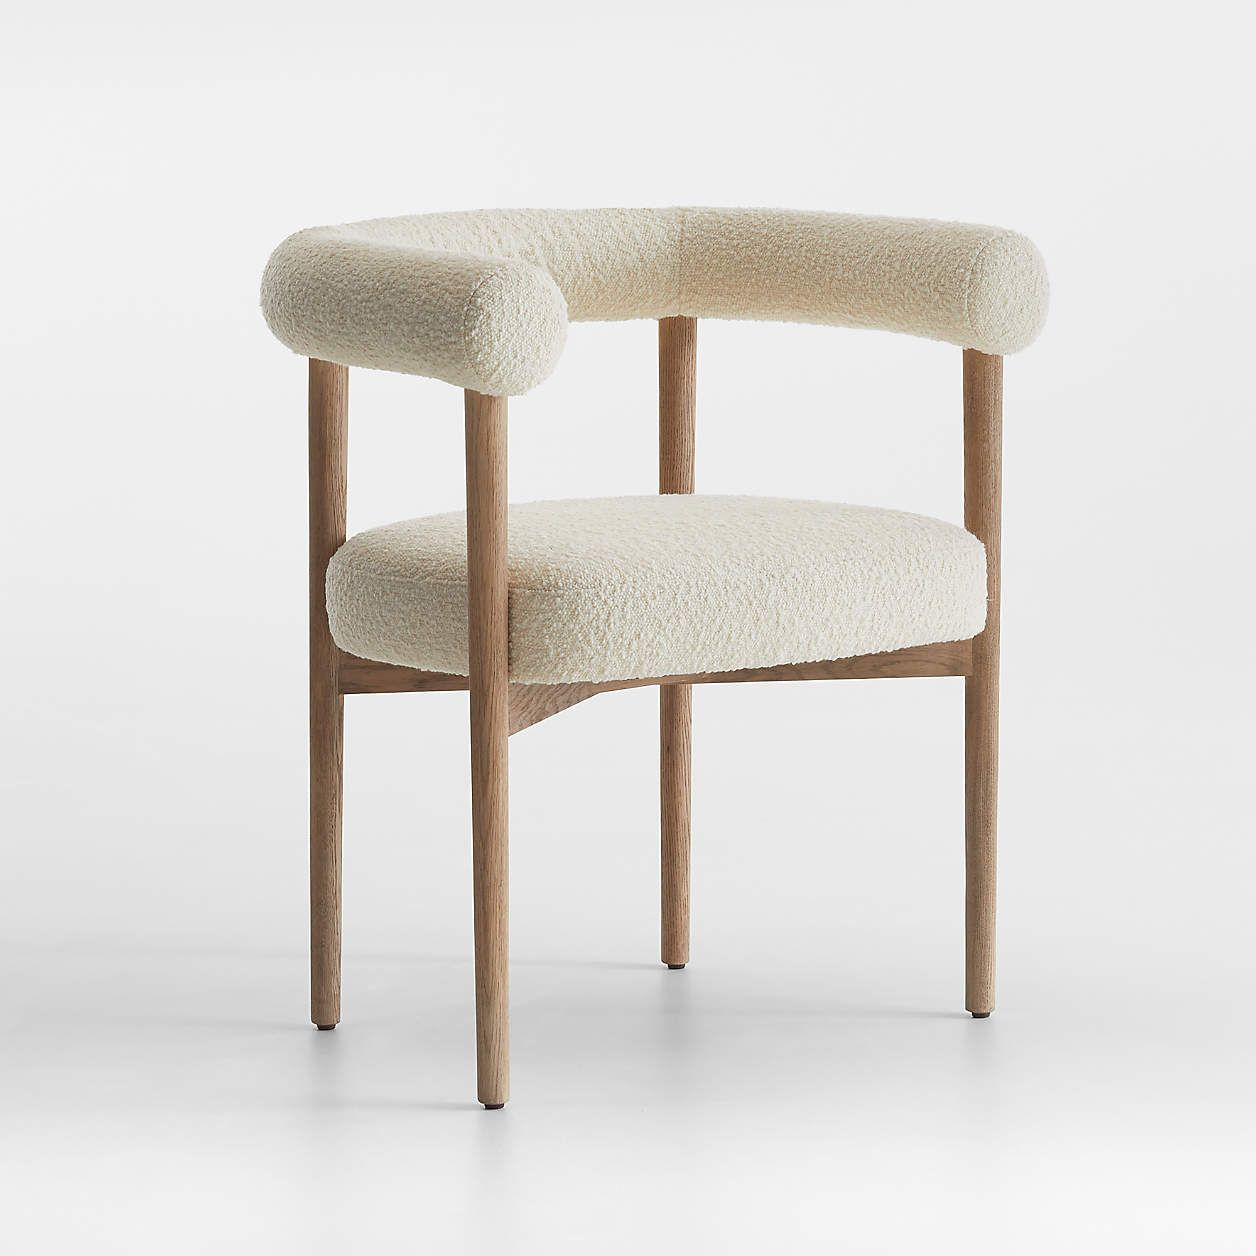 The Evolution of Contemporary Chairs: A Study on Modern Seating Options